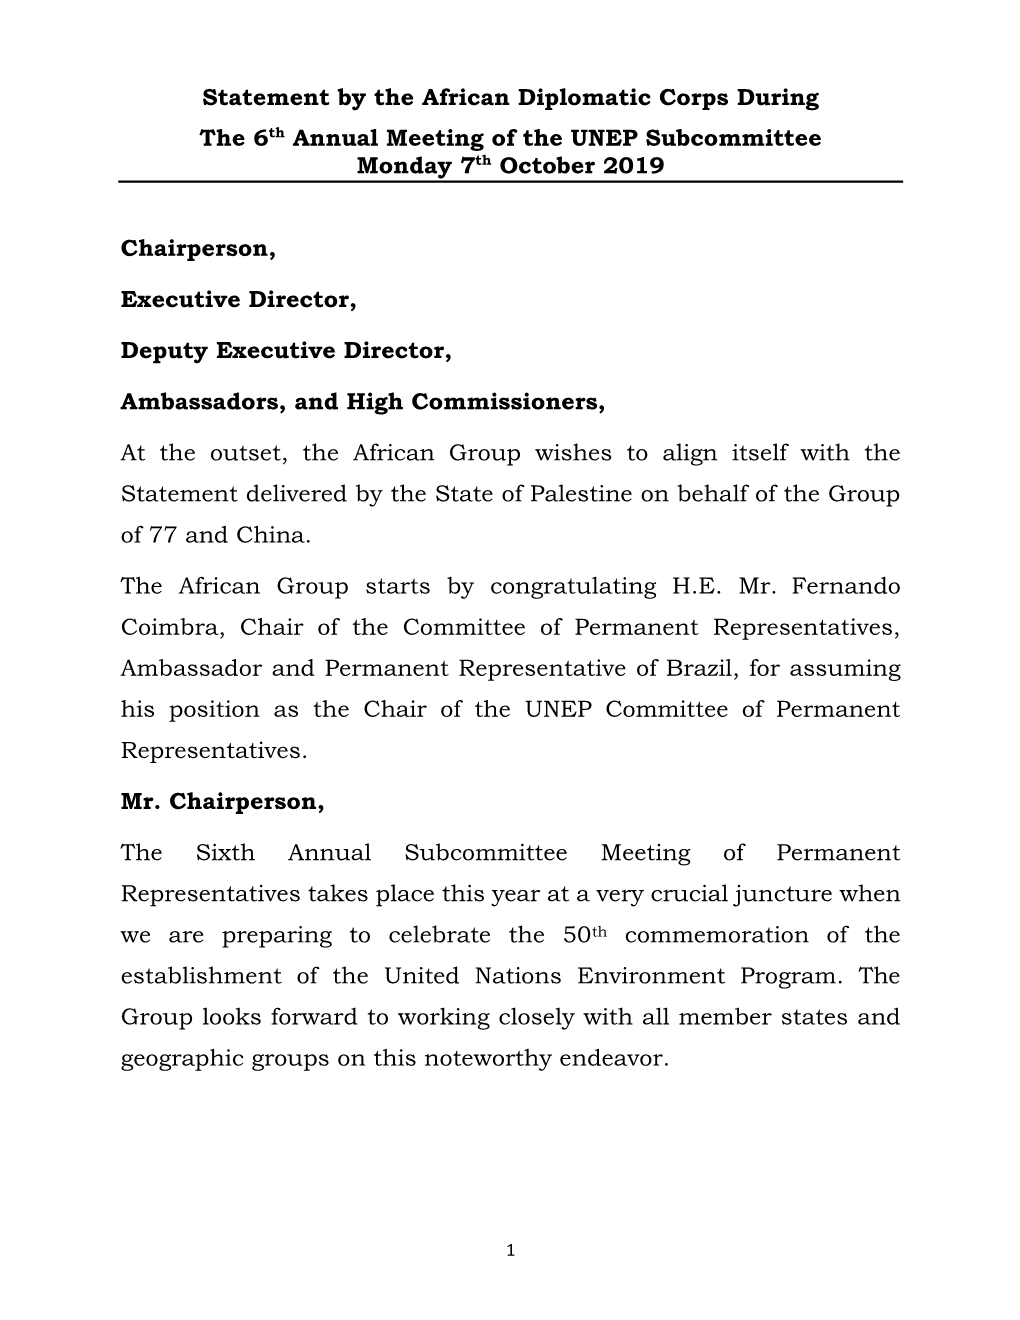 Statement by the African Diplomatic Corps During the 6Th Annual Meeting of the UNEP Subcommittee Monday 7Th October 2019